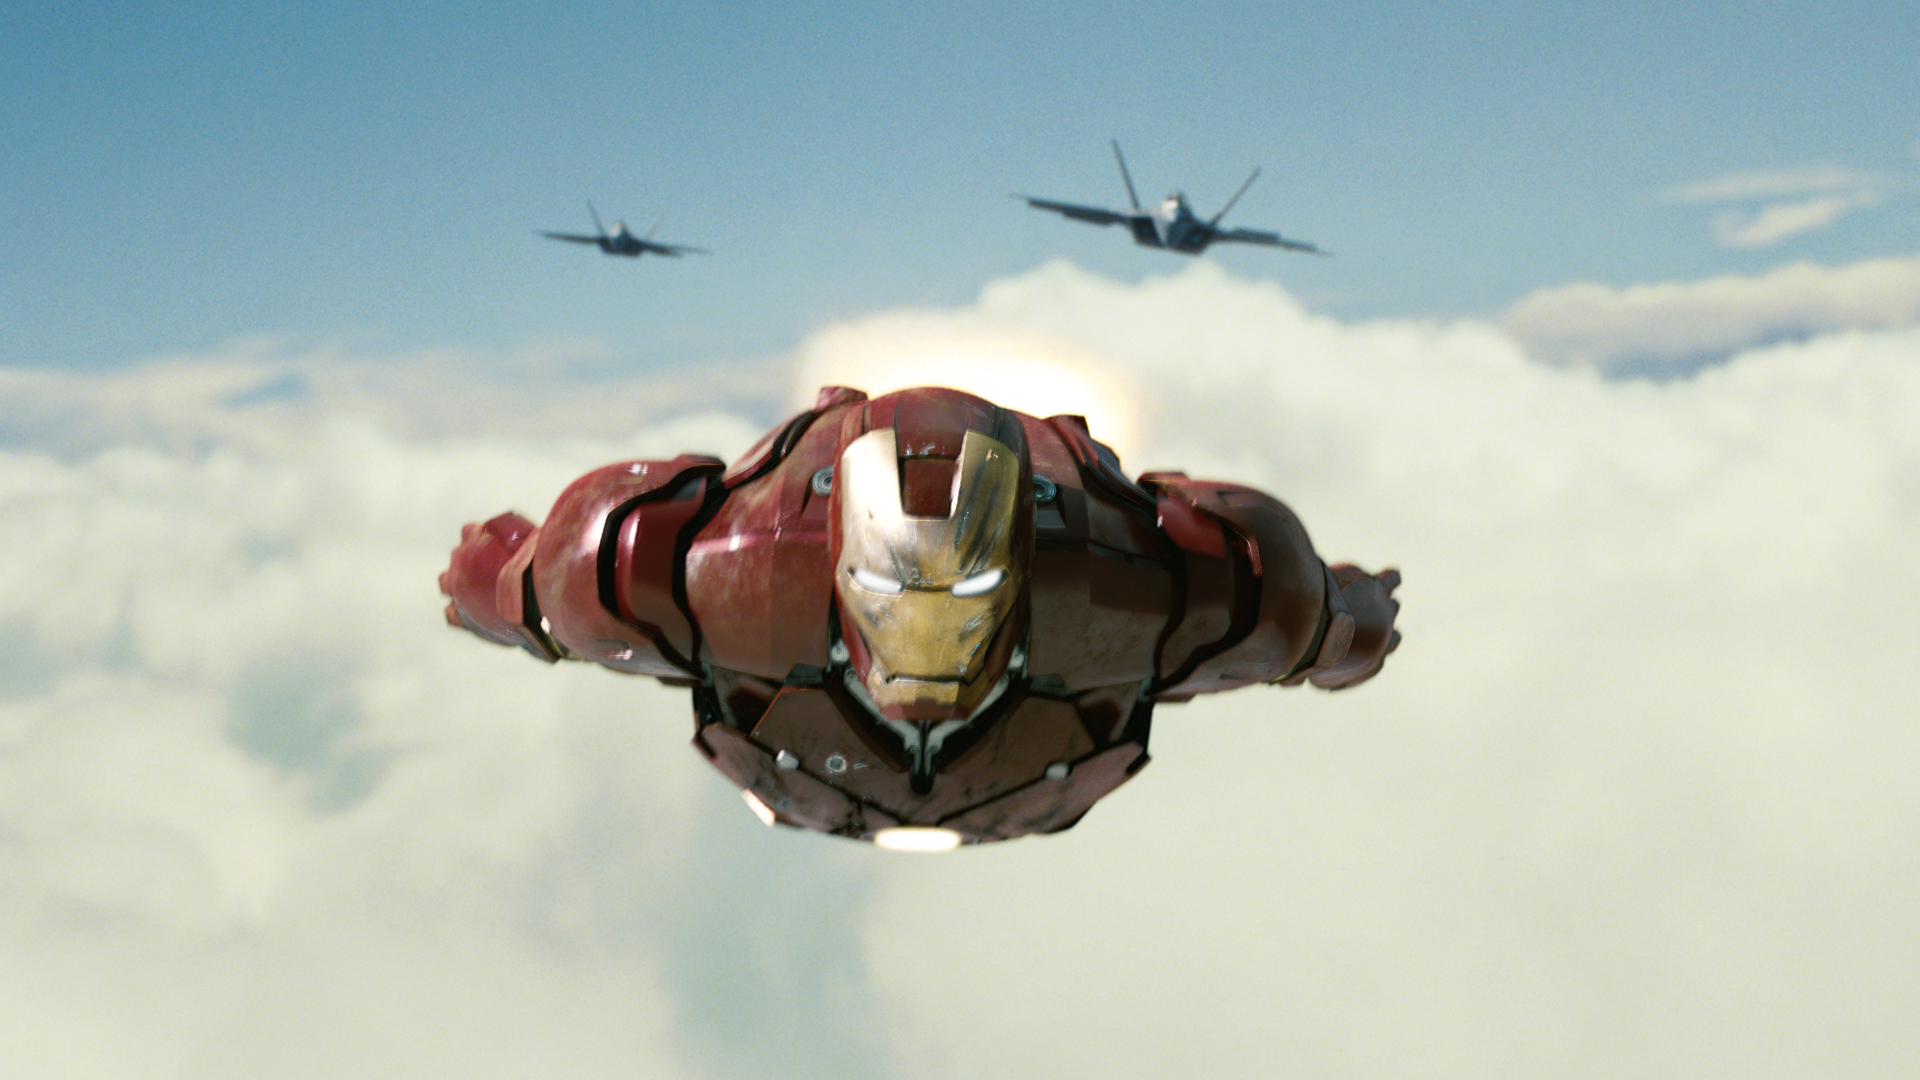 Tony Stark takes flight in this fully CG shot from the Academy Award®-nominated film, Iron Man (2008). © Disney/Marvel. All Rights Reserved.